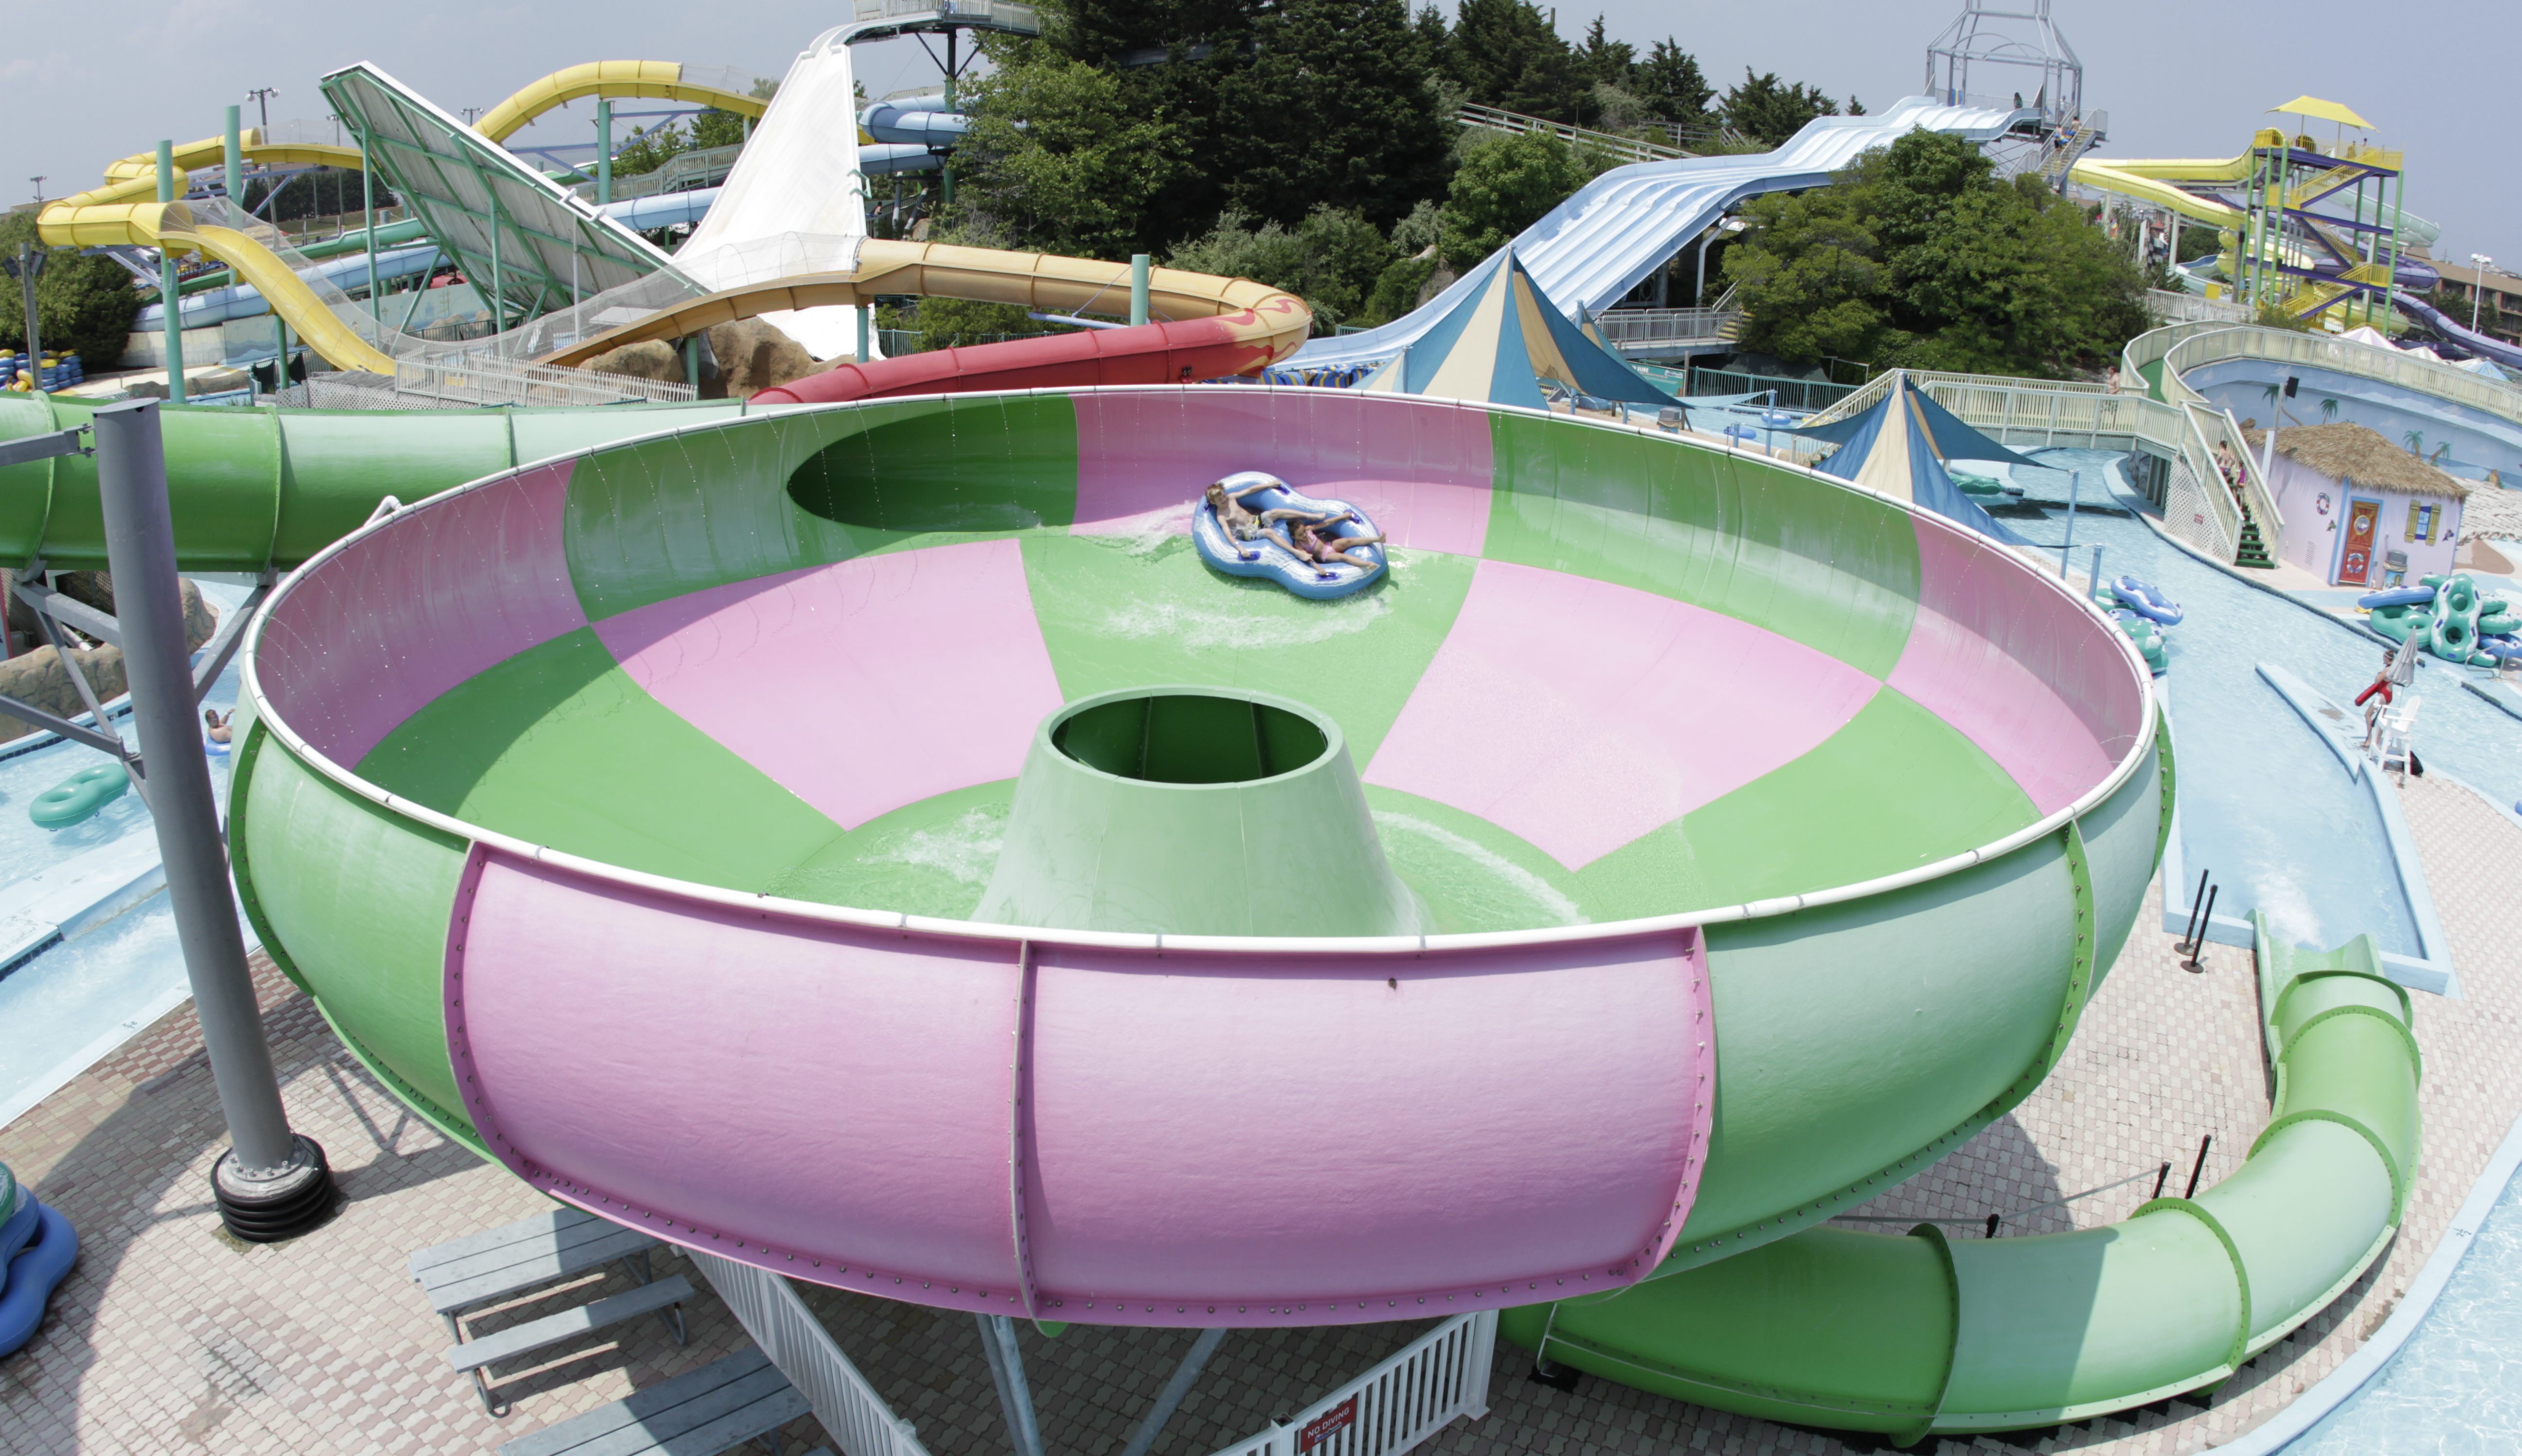 a pink and green hurricane shaped ride at a water park